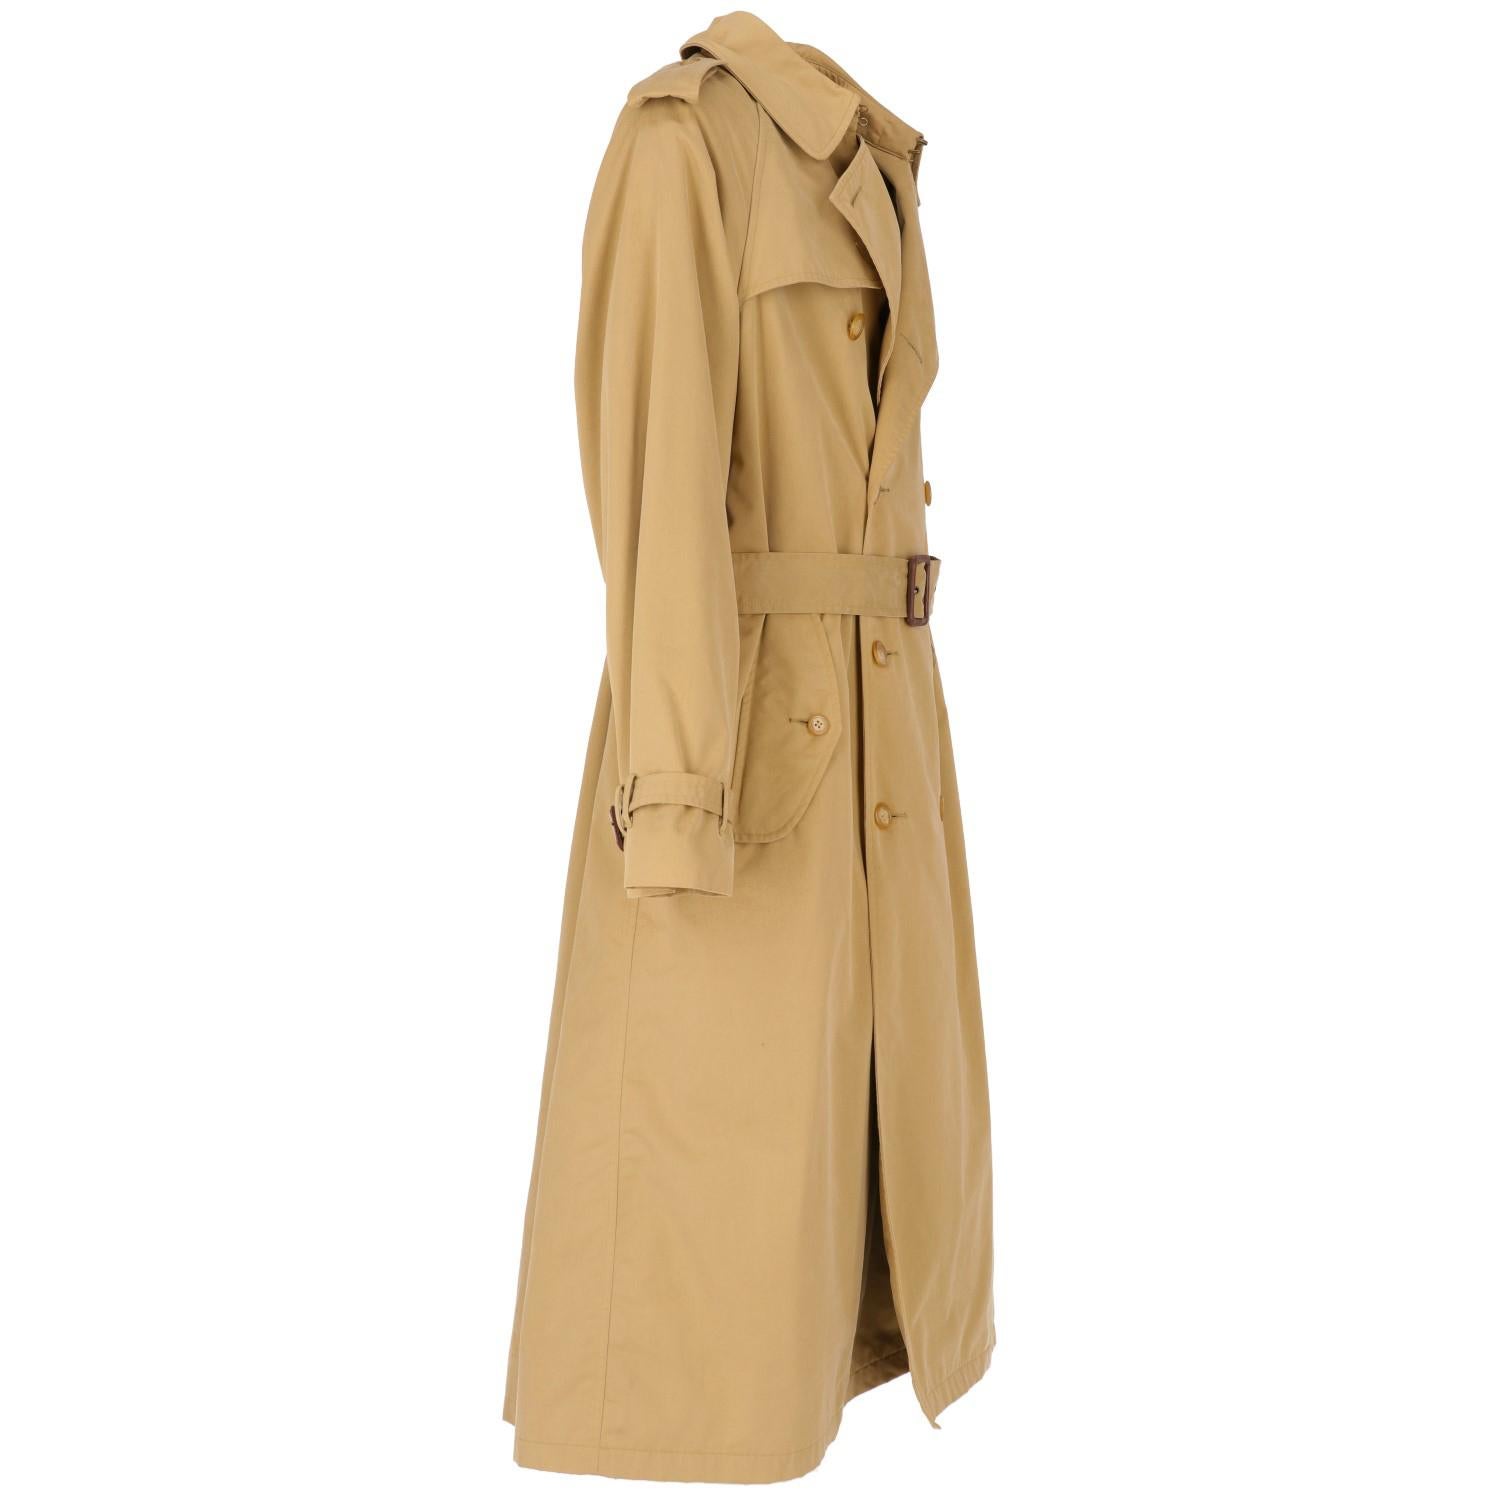 Classy Polo by Ralph Lauren trench coat for the elegant man. In beige blend cotton, with tartan lining and a second removable blend wool lining . The item is vintage it was produced in the 90s and is in good conditions, but the belt misses one ring